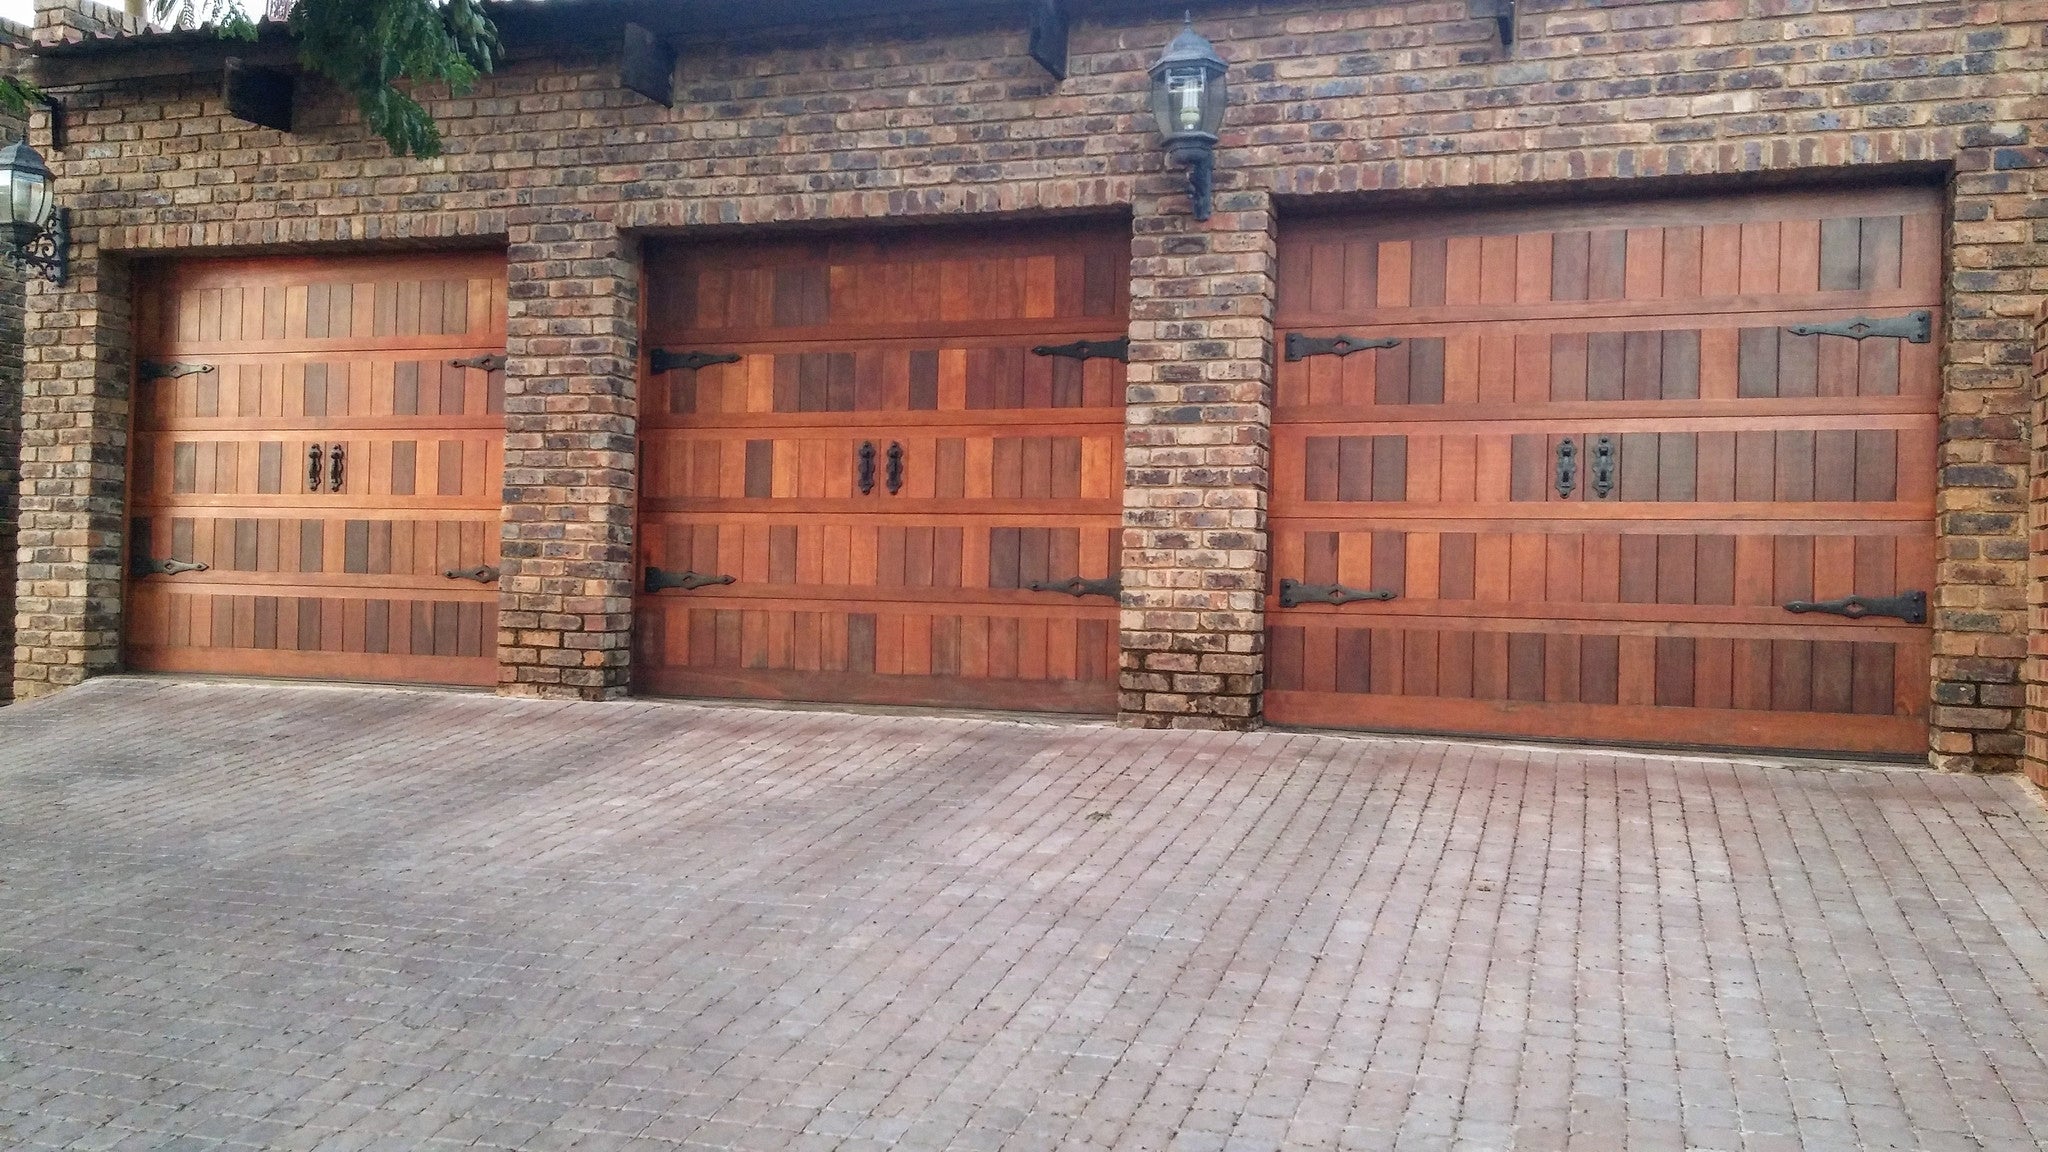 3 single garage doors all featuring NW/AC25 mock knockers and NW/AC6 mock hinges. 